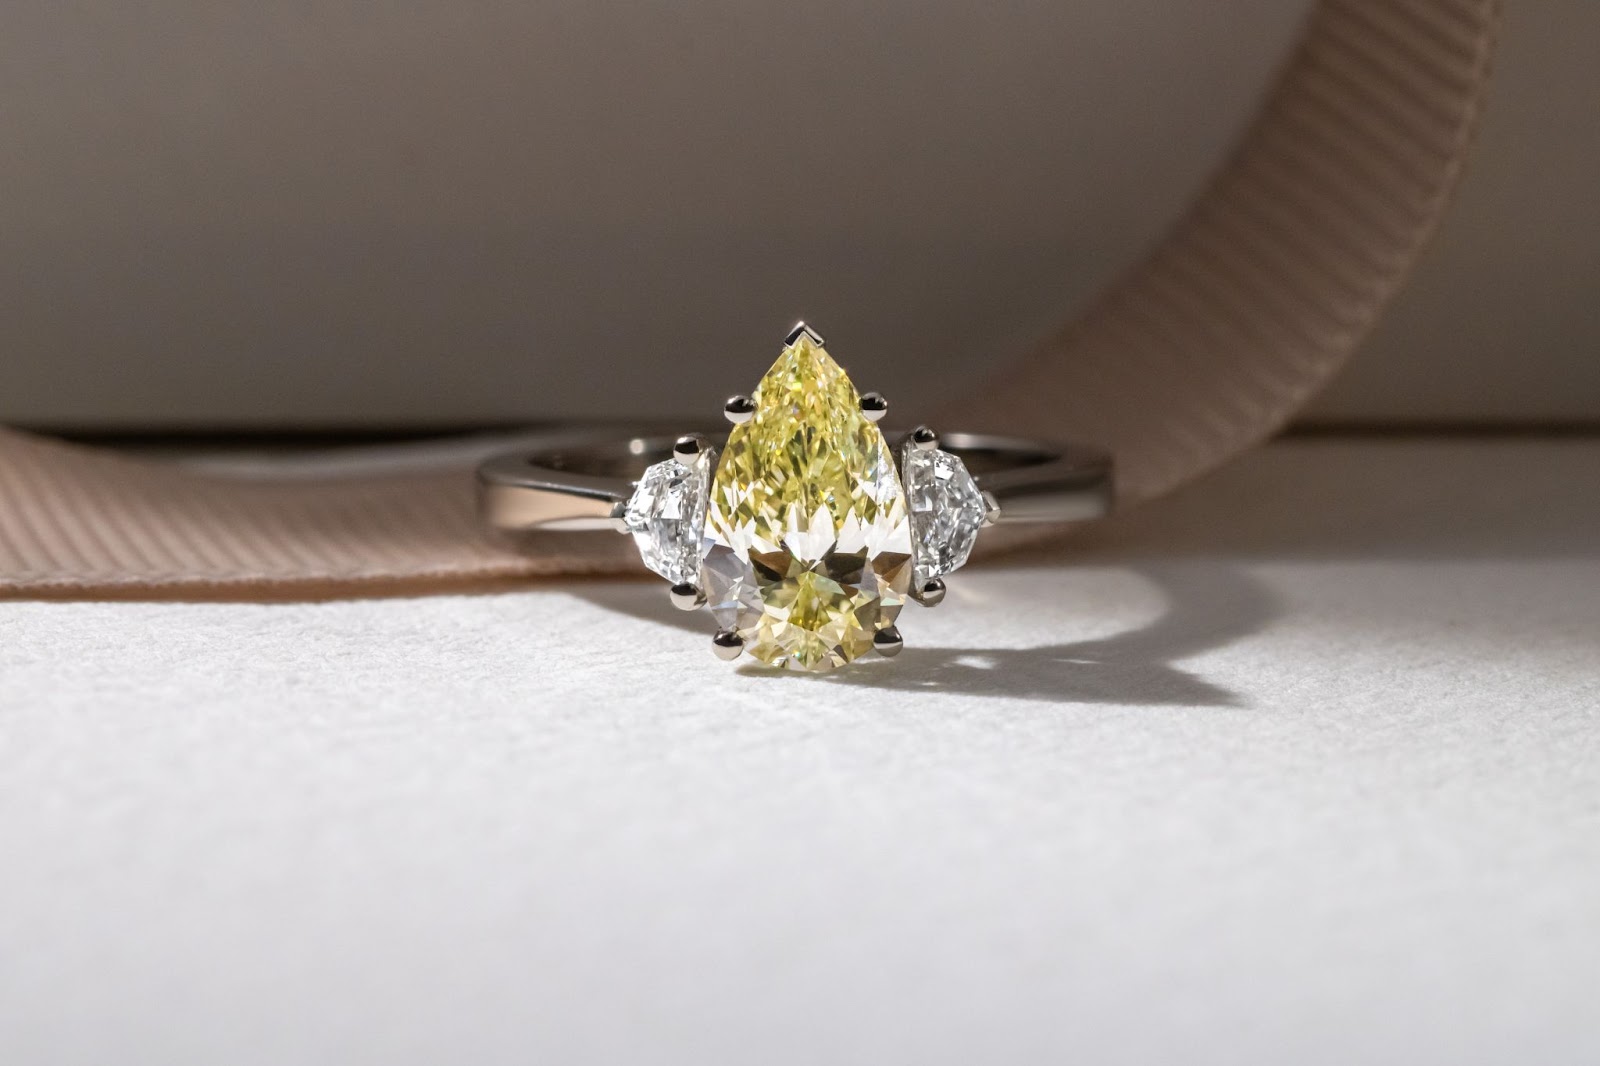 What you need to know about the 8 ct yellow diamond?